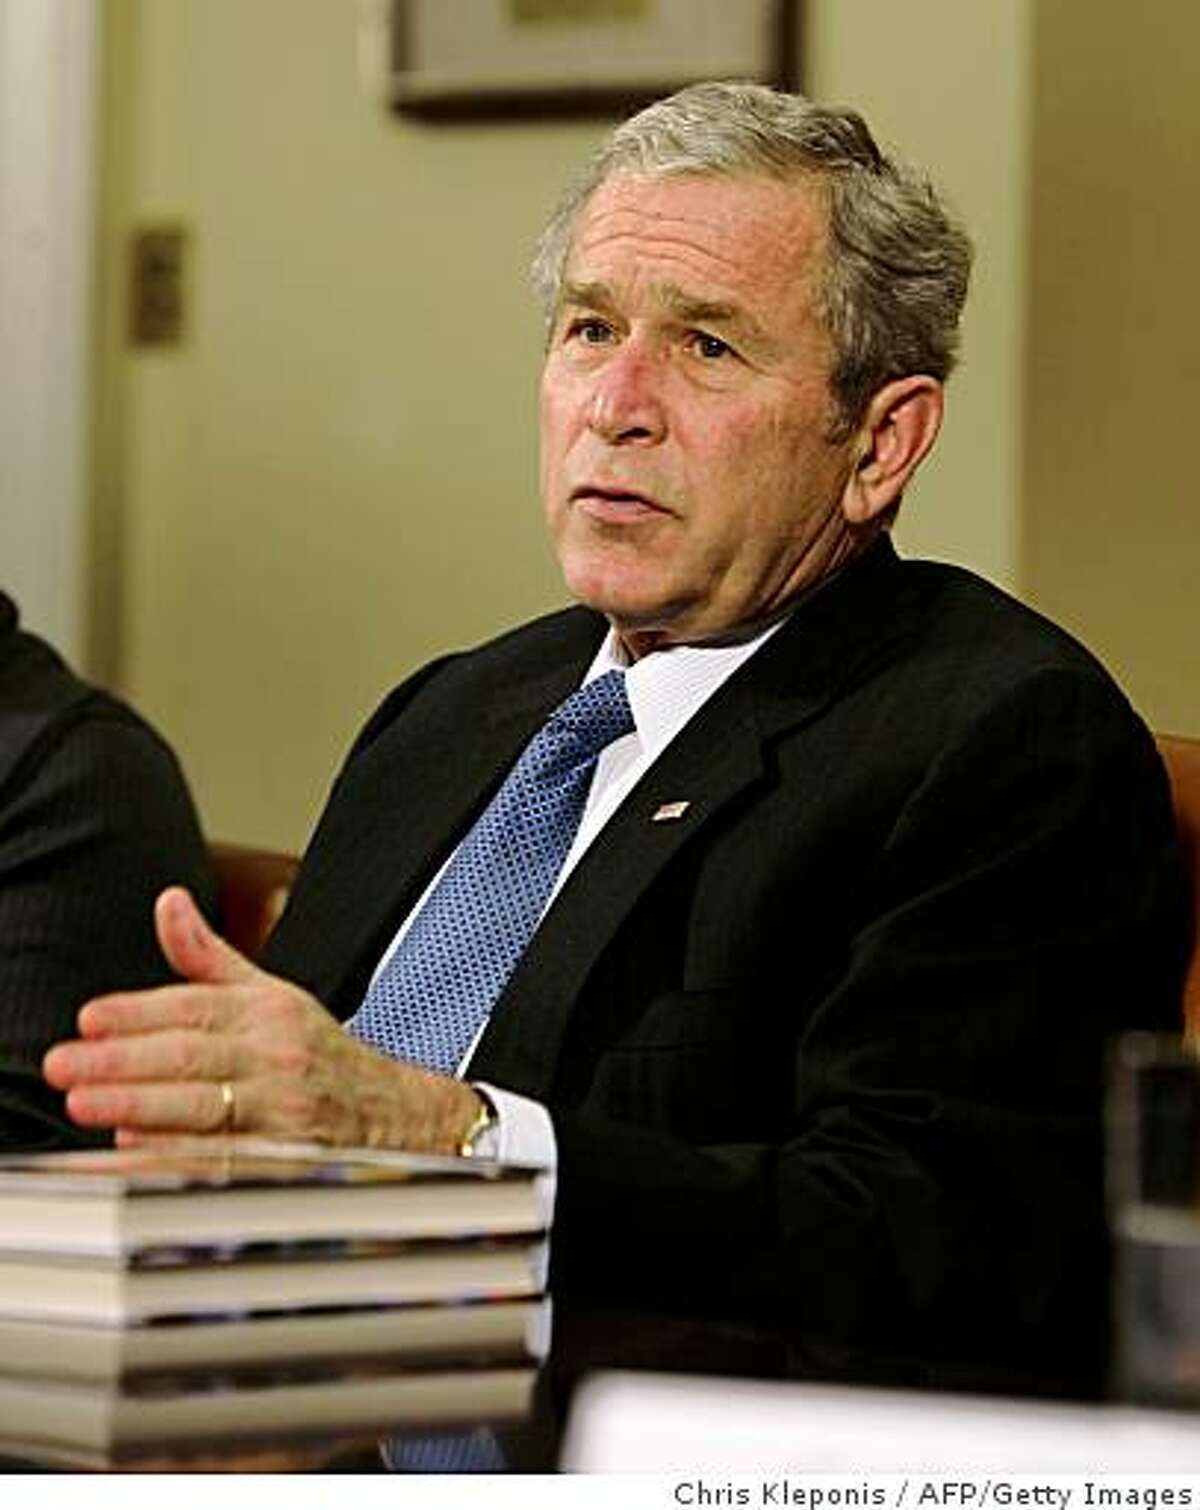 US President George W. Bush speaks at the conclusion of a meeting with people in recovery, leaders in drug prevention, treatment and law enforcement at The White House on December 11, 2008 in Washington, DC. During the meeting, they spoke of some success in the decline in the use of drugs in the nation and efforts to continue efforts to reduce drug use by youths. AFP PHOTO/ Chris Kleponis (Photo credit should read CHRIS KLEPONIS/AFP/Getty Images)